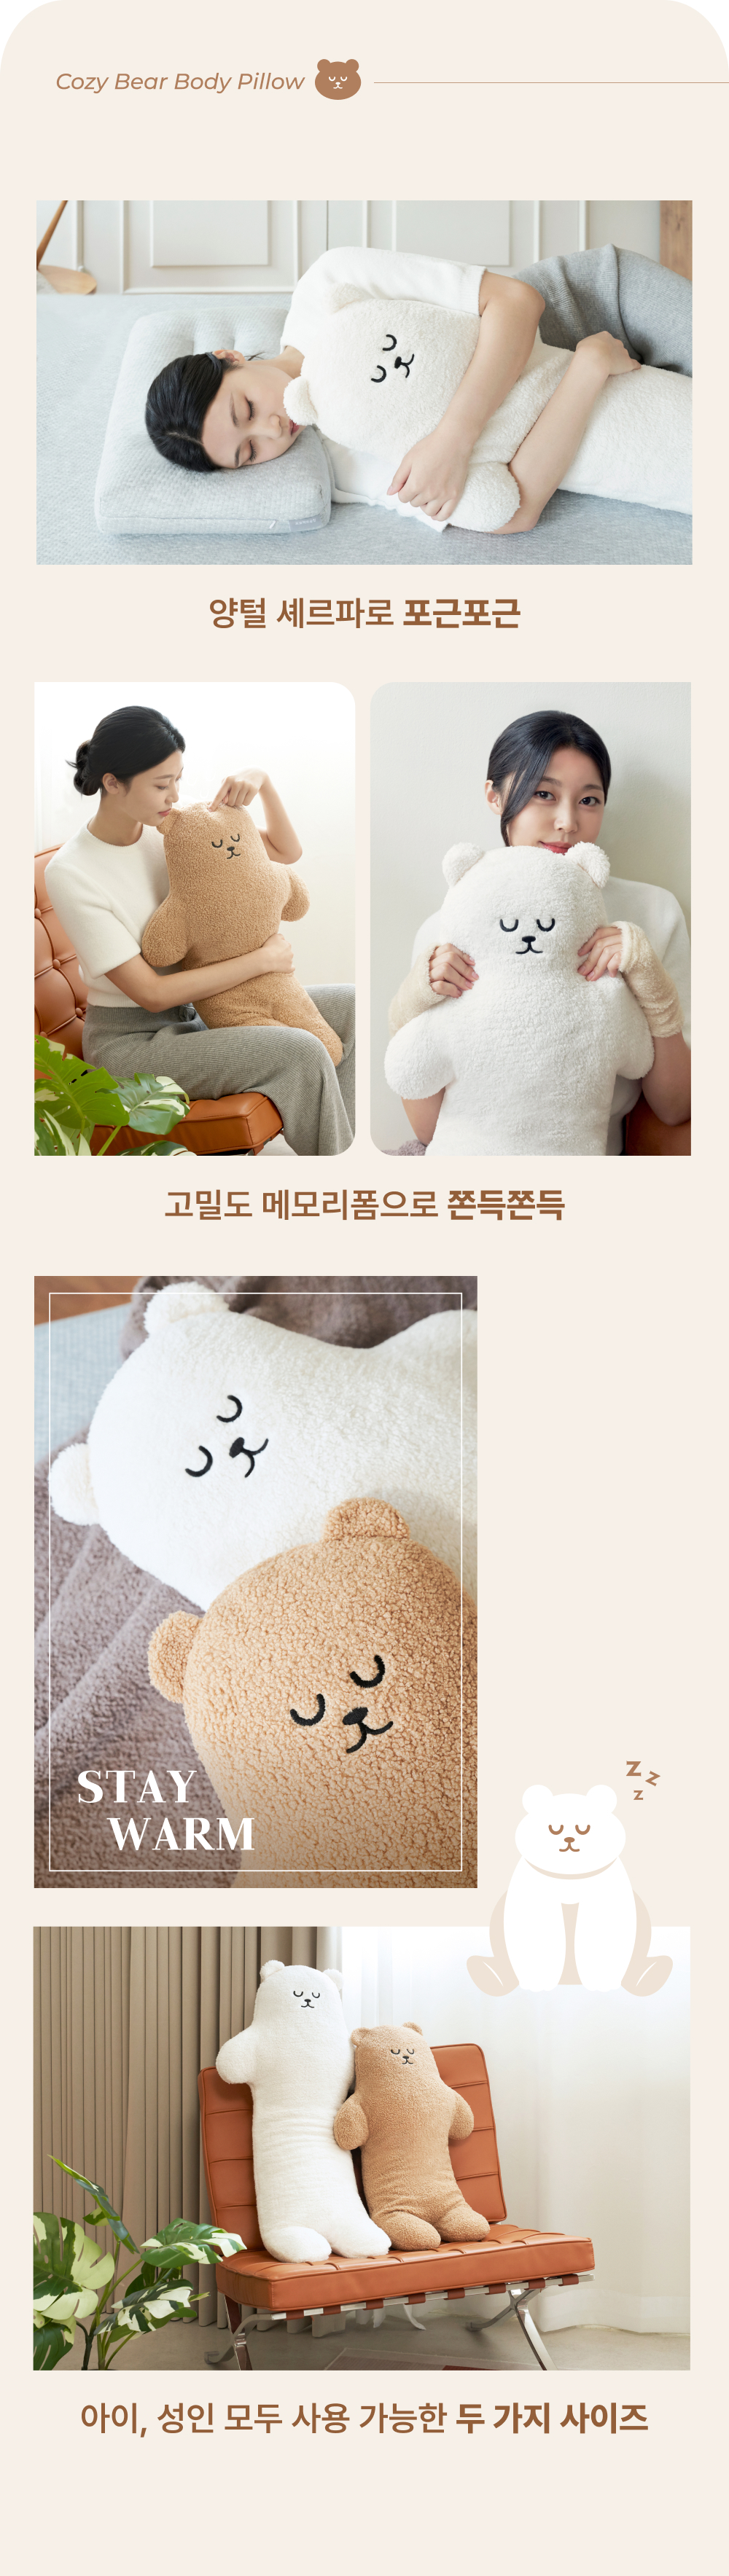 PS_CozyBearBodyPillow_detailpage_3_182250.jpg